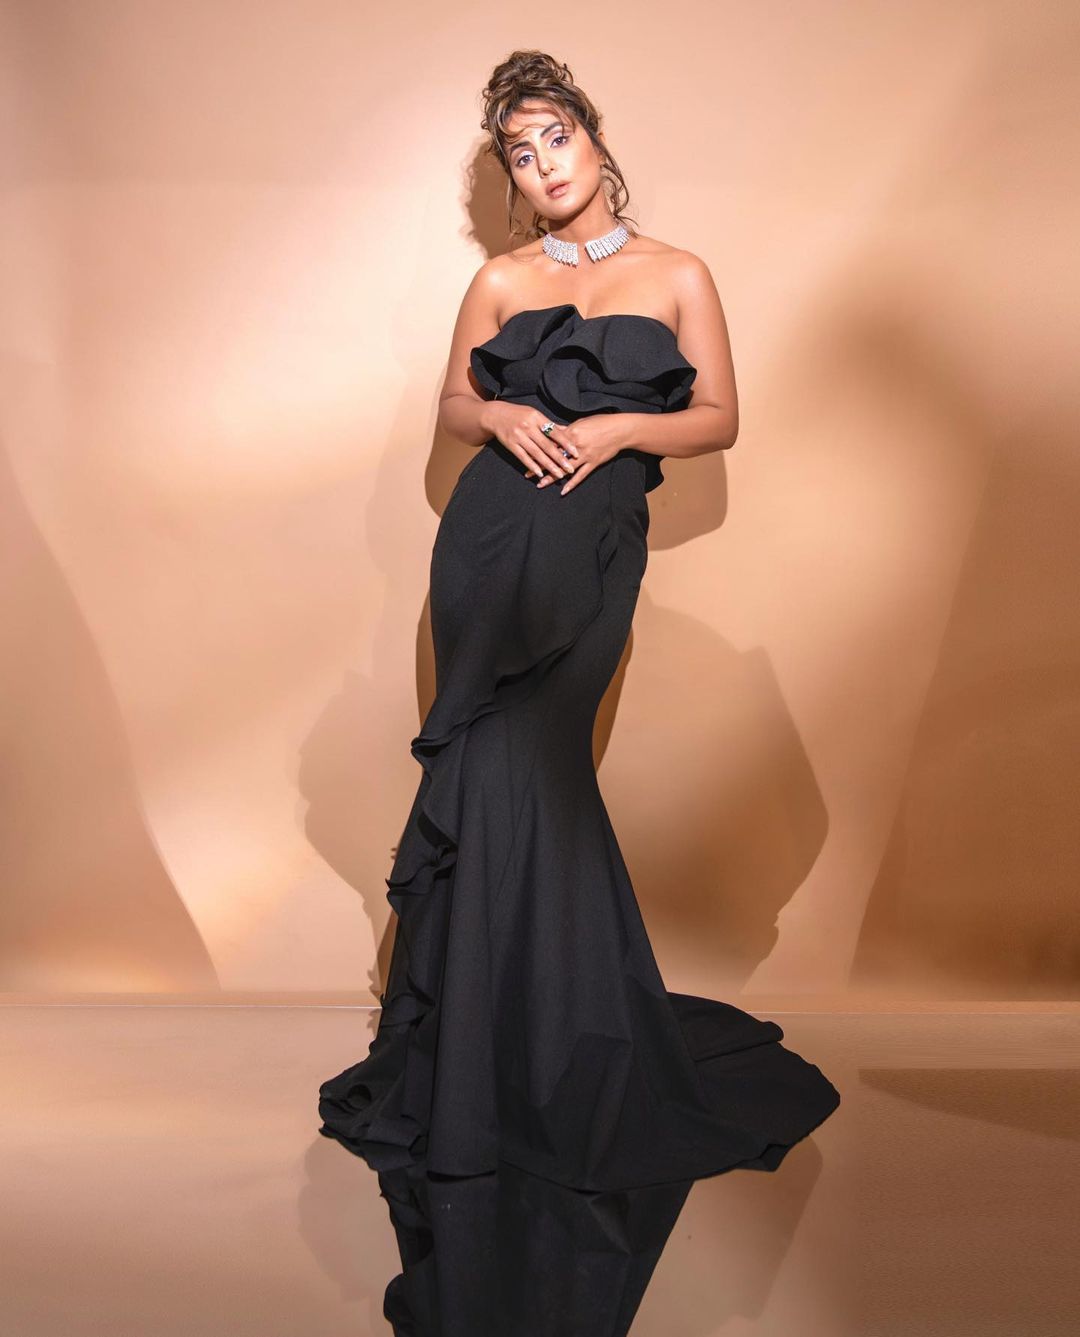 To Present Naatu Naatu's Performance At The Oscars 2023, Deepika Padukone  Is Beauty And Grace In An Off-Shoulder Black Gown